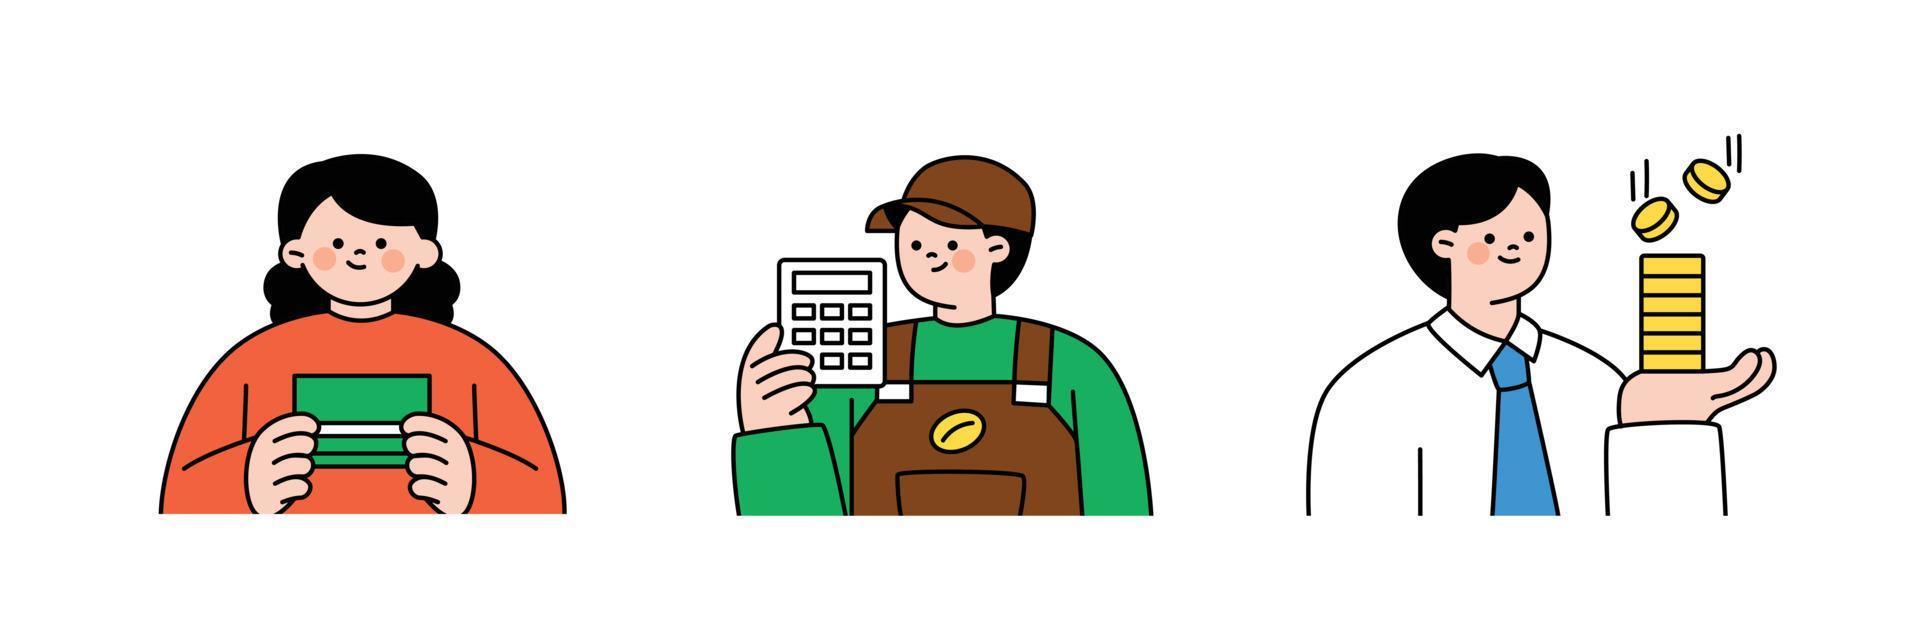 Finance and people, accounts for household economic growth, investment plan management. Workers are holding bankbooks, calculators and coins. Vector illustration.